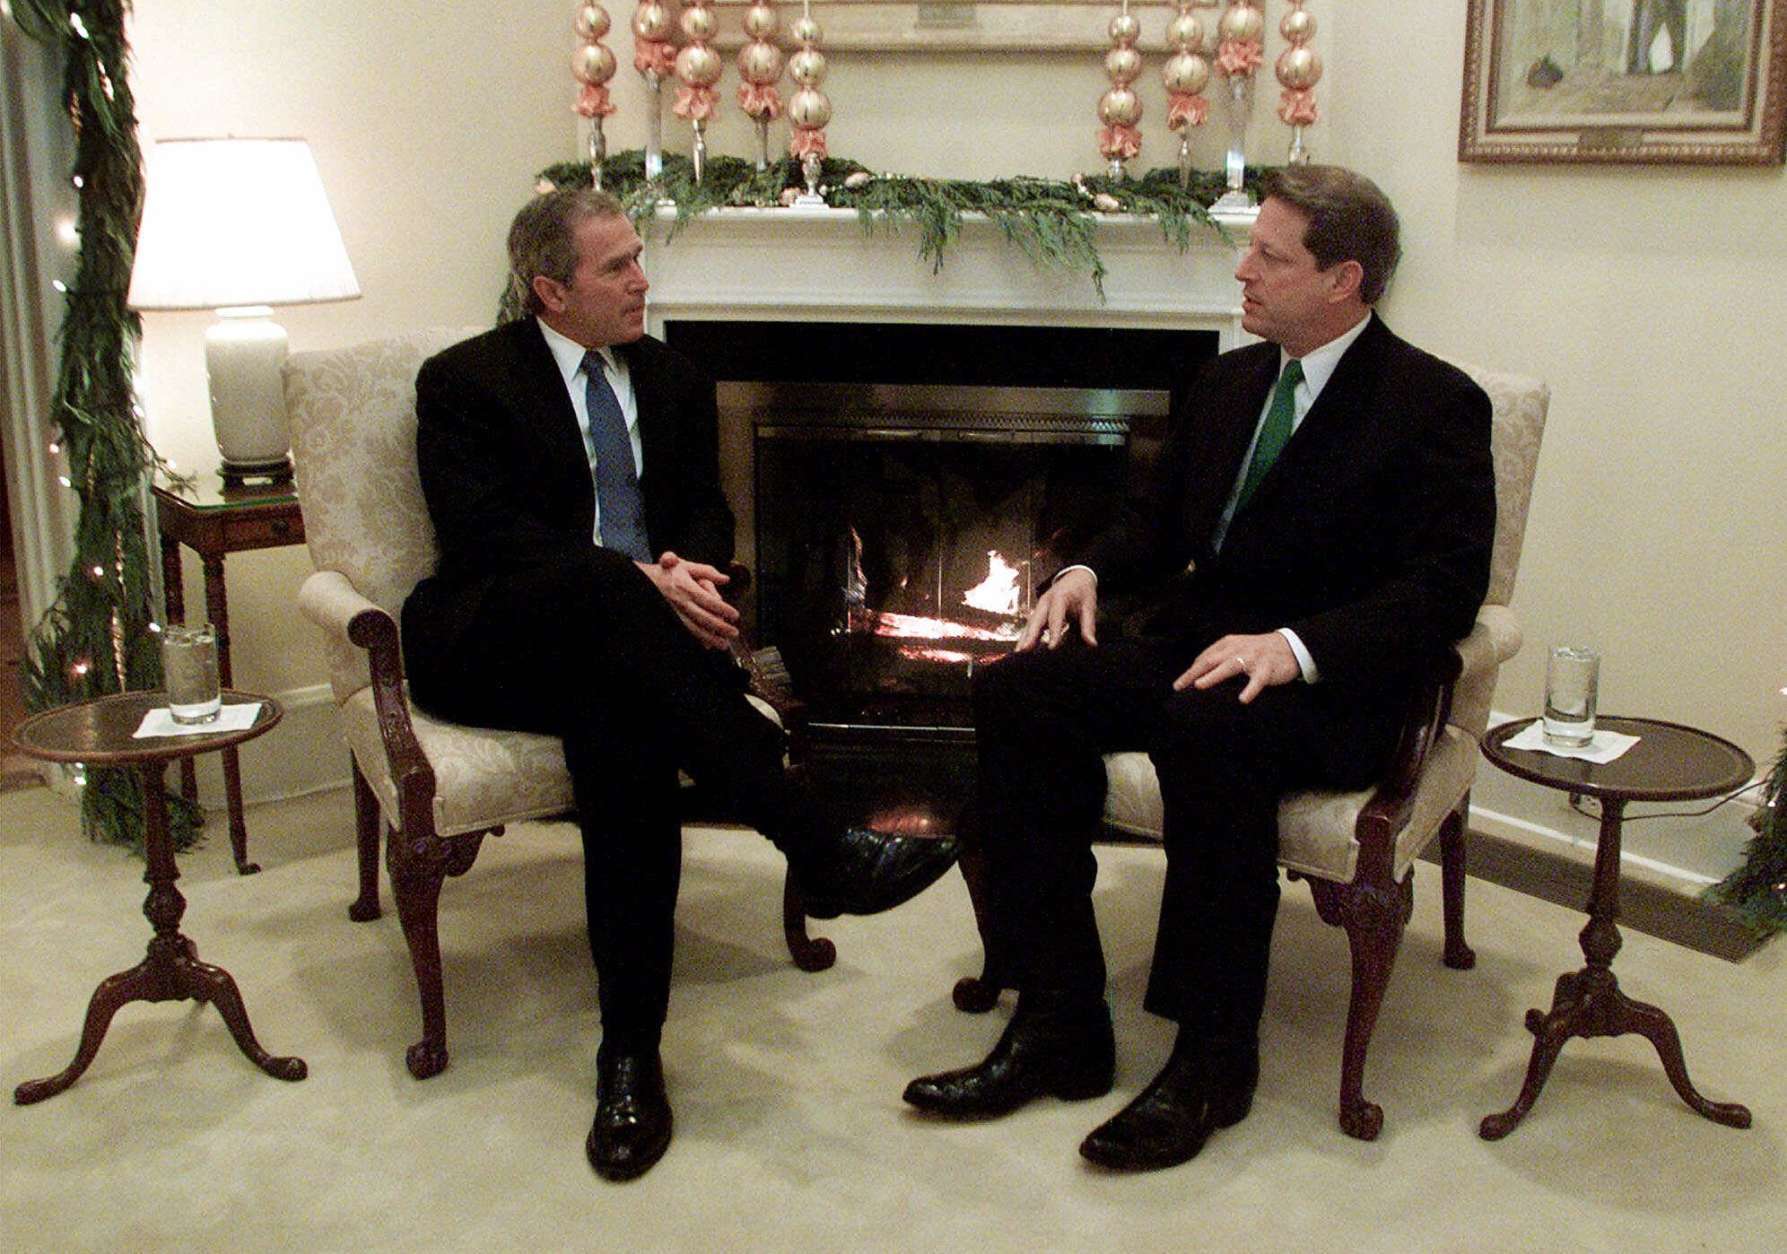 President-elect Bush, left, meets with Vice President Al Gore in the living room of the vice presidential residence in Washington, Tuesday, Dec. 19, 2000. Tuesday's fireside talk lasted just 15 minutes, hardly long enough to close the breach opened during a hard-fought campaign and rancorous postelection tussle.(AP Photo/Doug Mills, POOL)